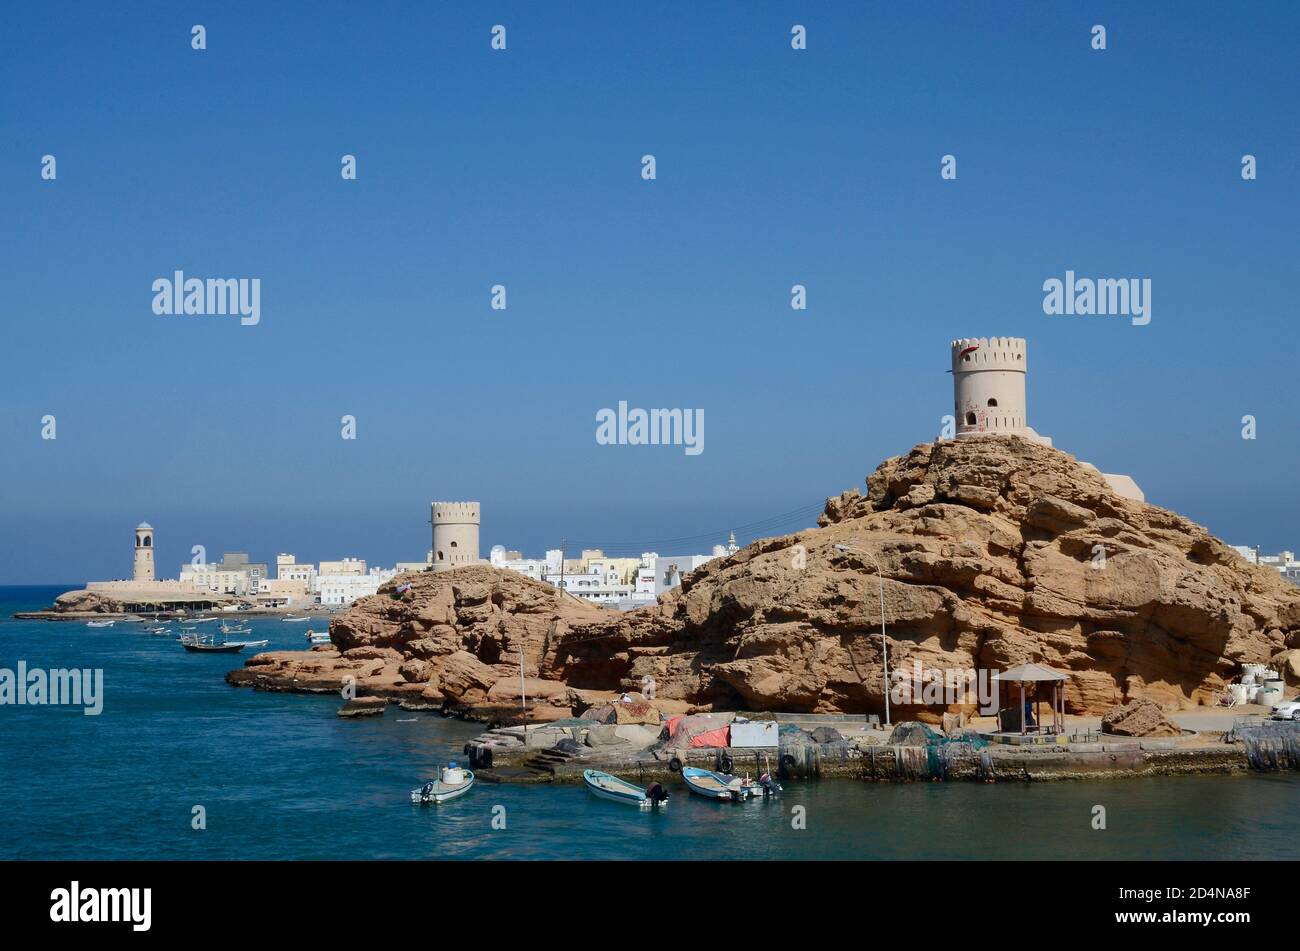 Al-Ayjah watchtower on top of the hill in Sur, Oman. Stock Photo